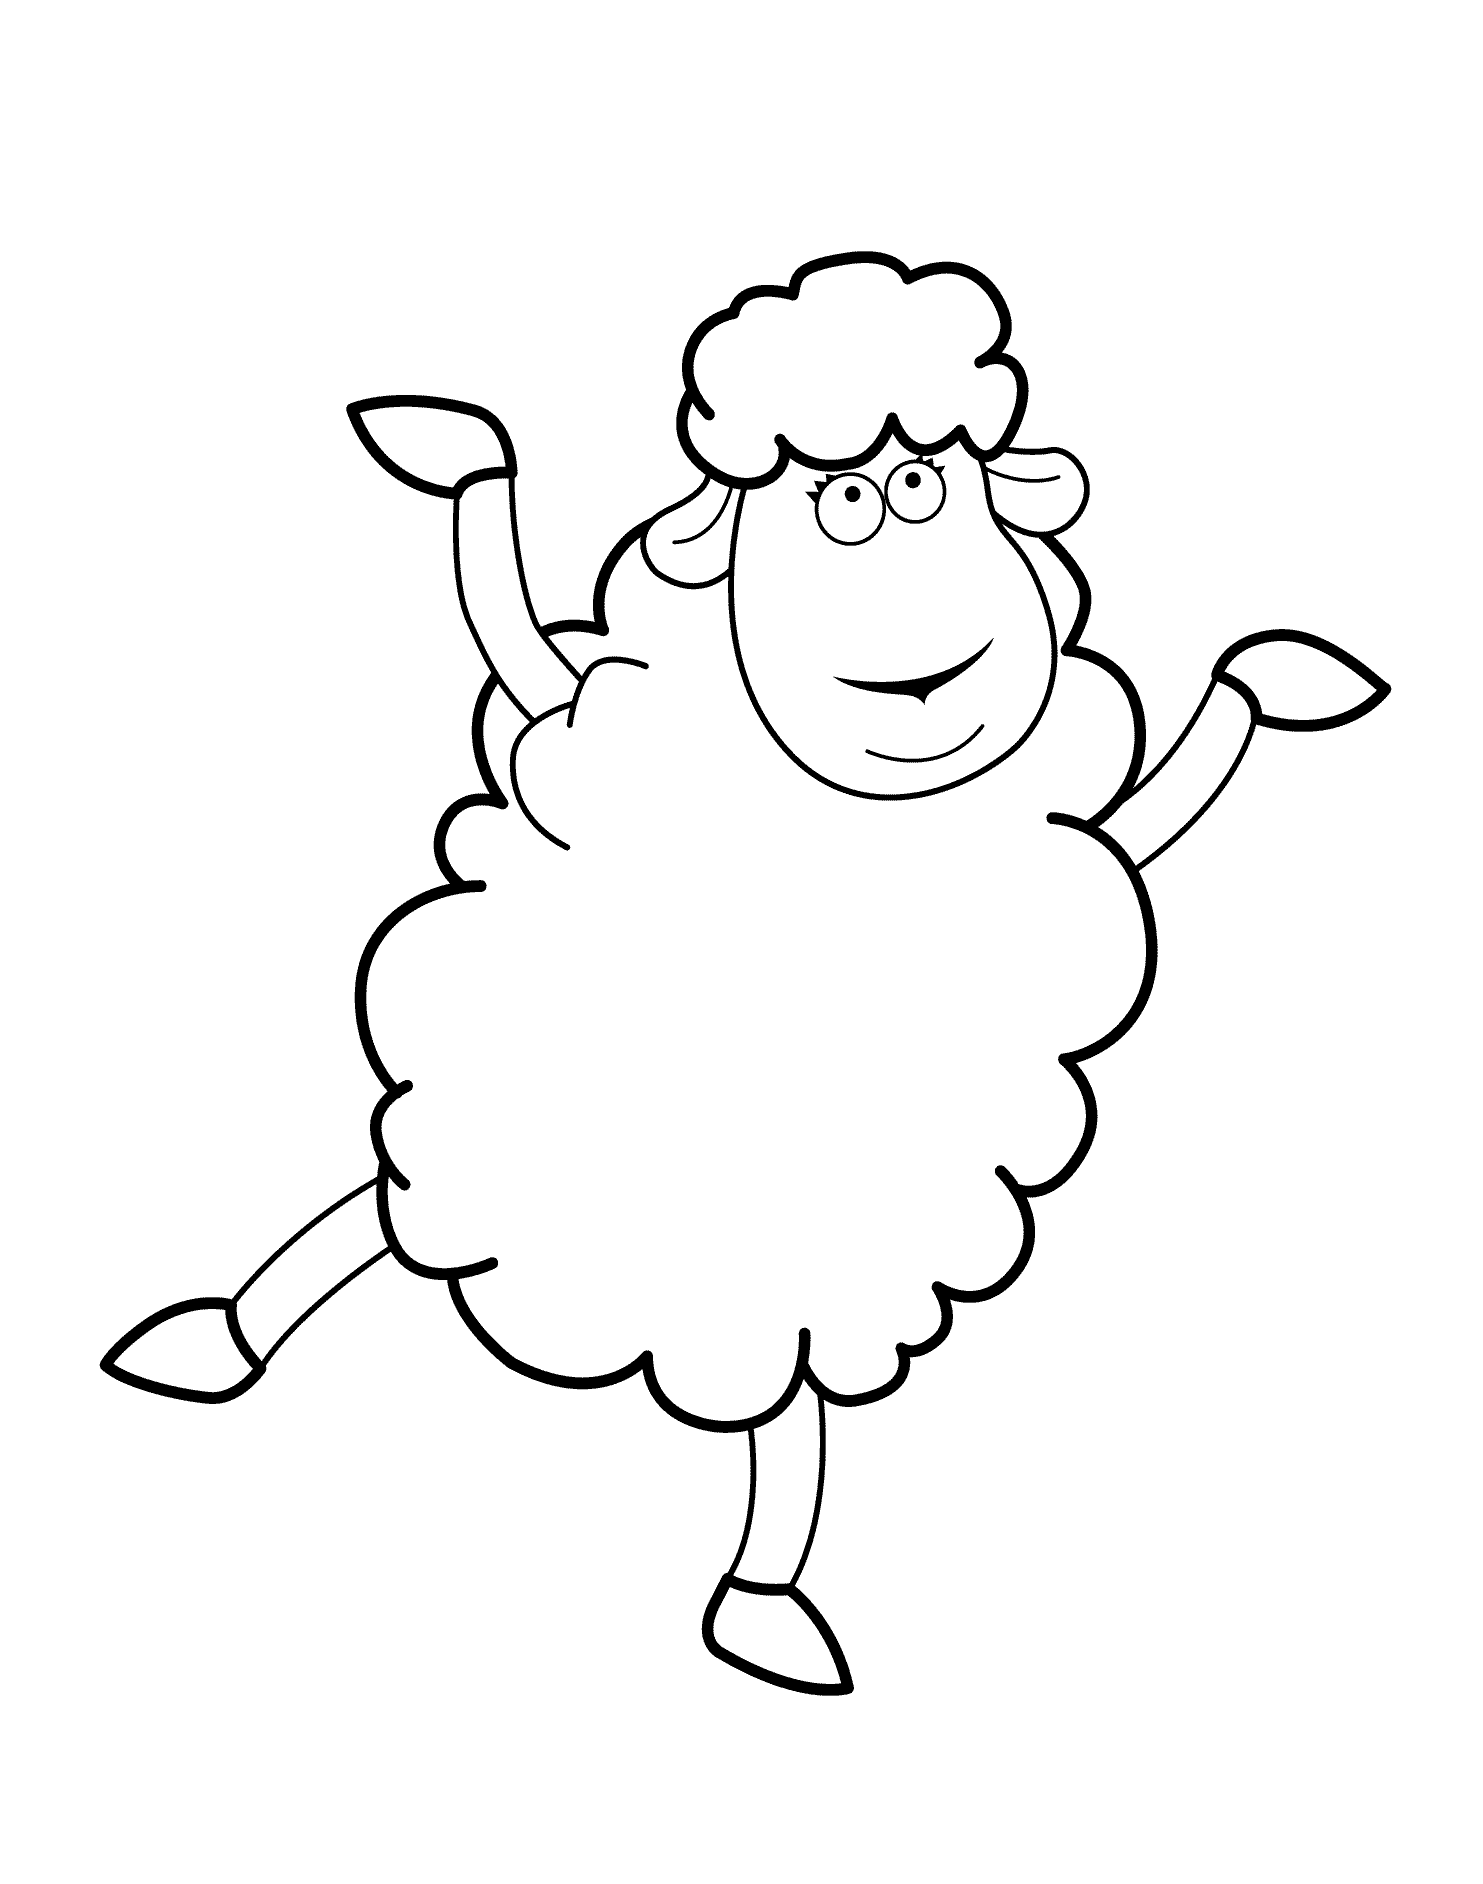 Funny Sheep Cartoon Animals Coloring Pages For Kids Printable ...